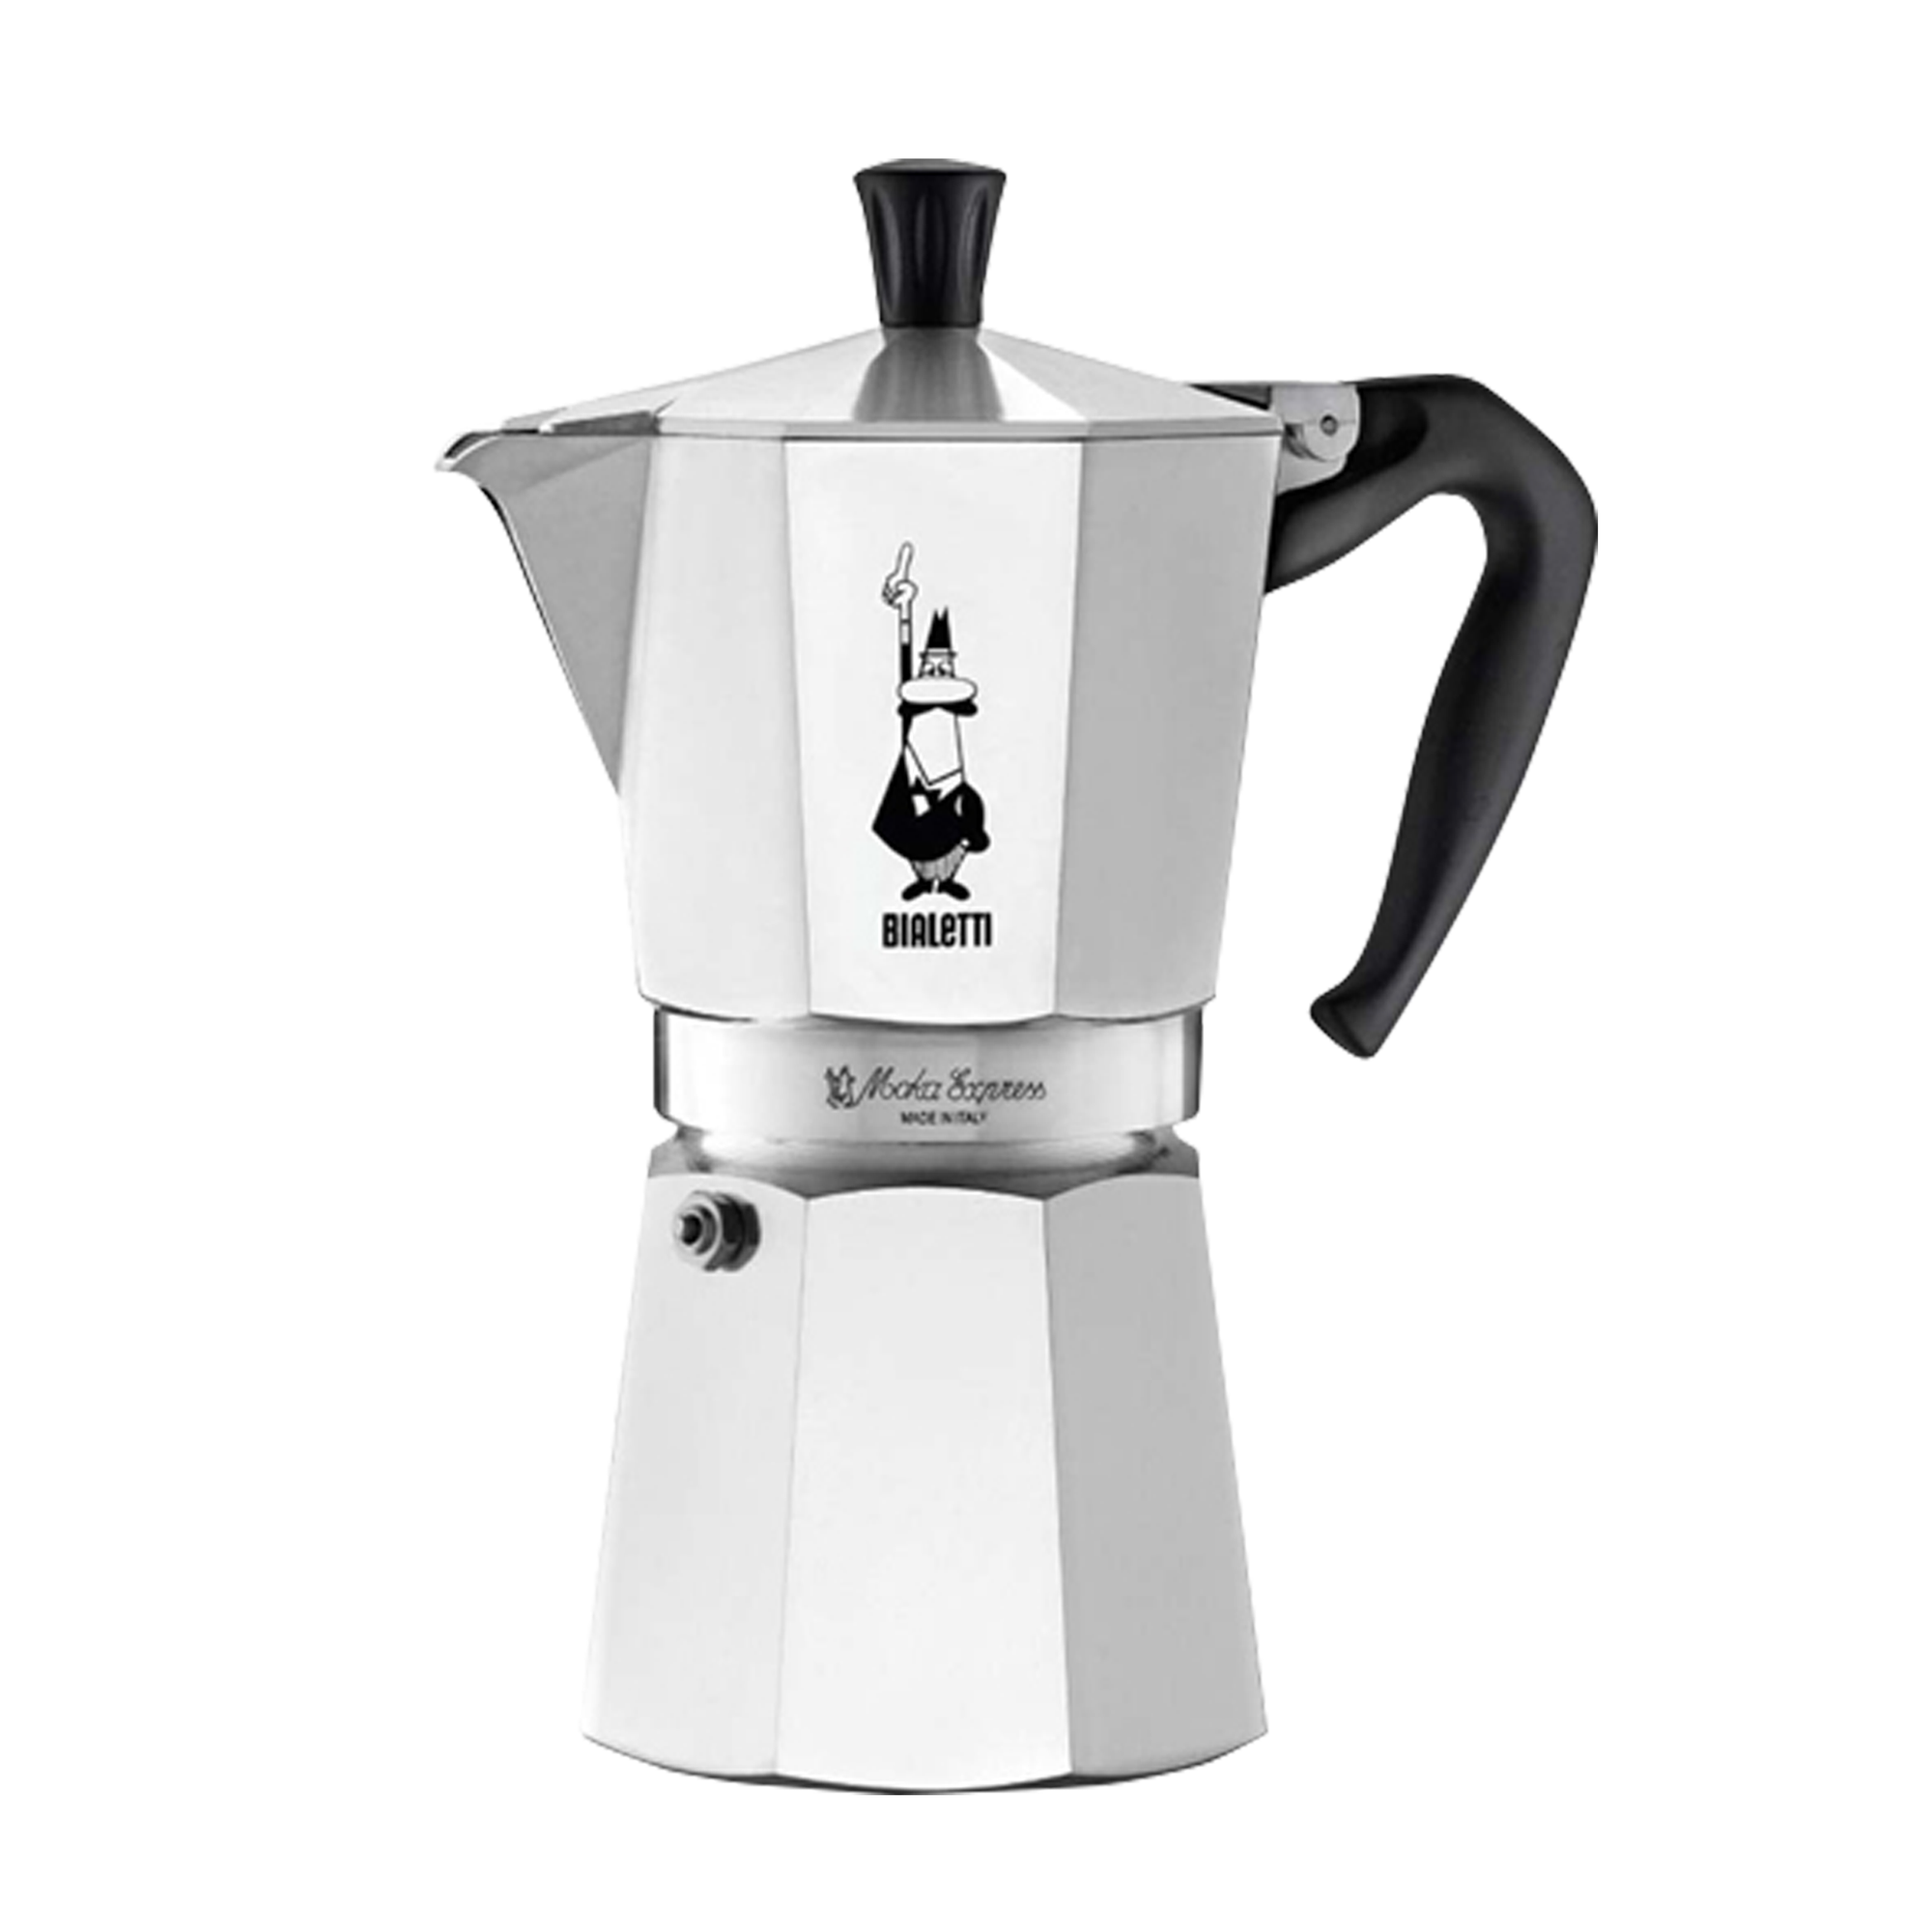 Bialetti Moka Express Review: Why I Love This Stovetop Coffee Pot